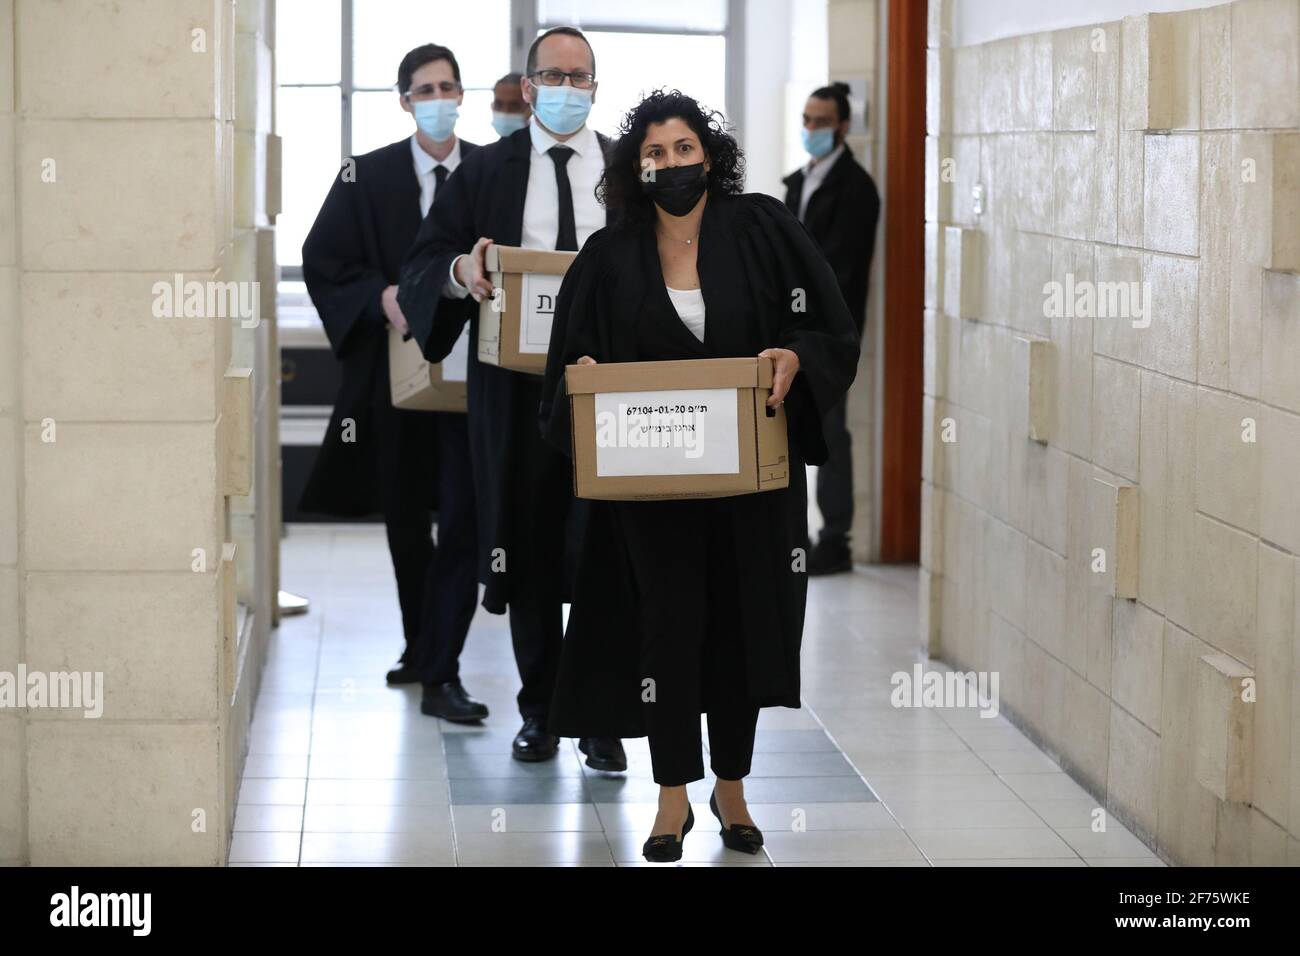 Jerusalem, Israel. 05th Apr, 2021. State attorneys carrying the prosecution materials of the Israeli Prime Minister Benjamin Netanyahu trial at the Jerusalem district court, in Salah El-Din, East Jerusalem on Monday April 5, 2021. Netanyahu attends to court to formally respond to the evidence stage of his charges of bribery, fraud and breach of trust, just weeks after the national elections. Pool Photo by Abir Sultan/UPI Credit: UPI/Alamy Live News Stock Photo